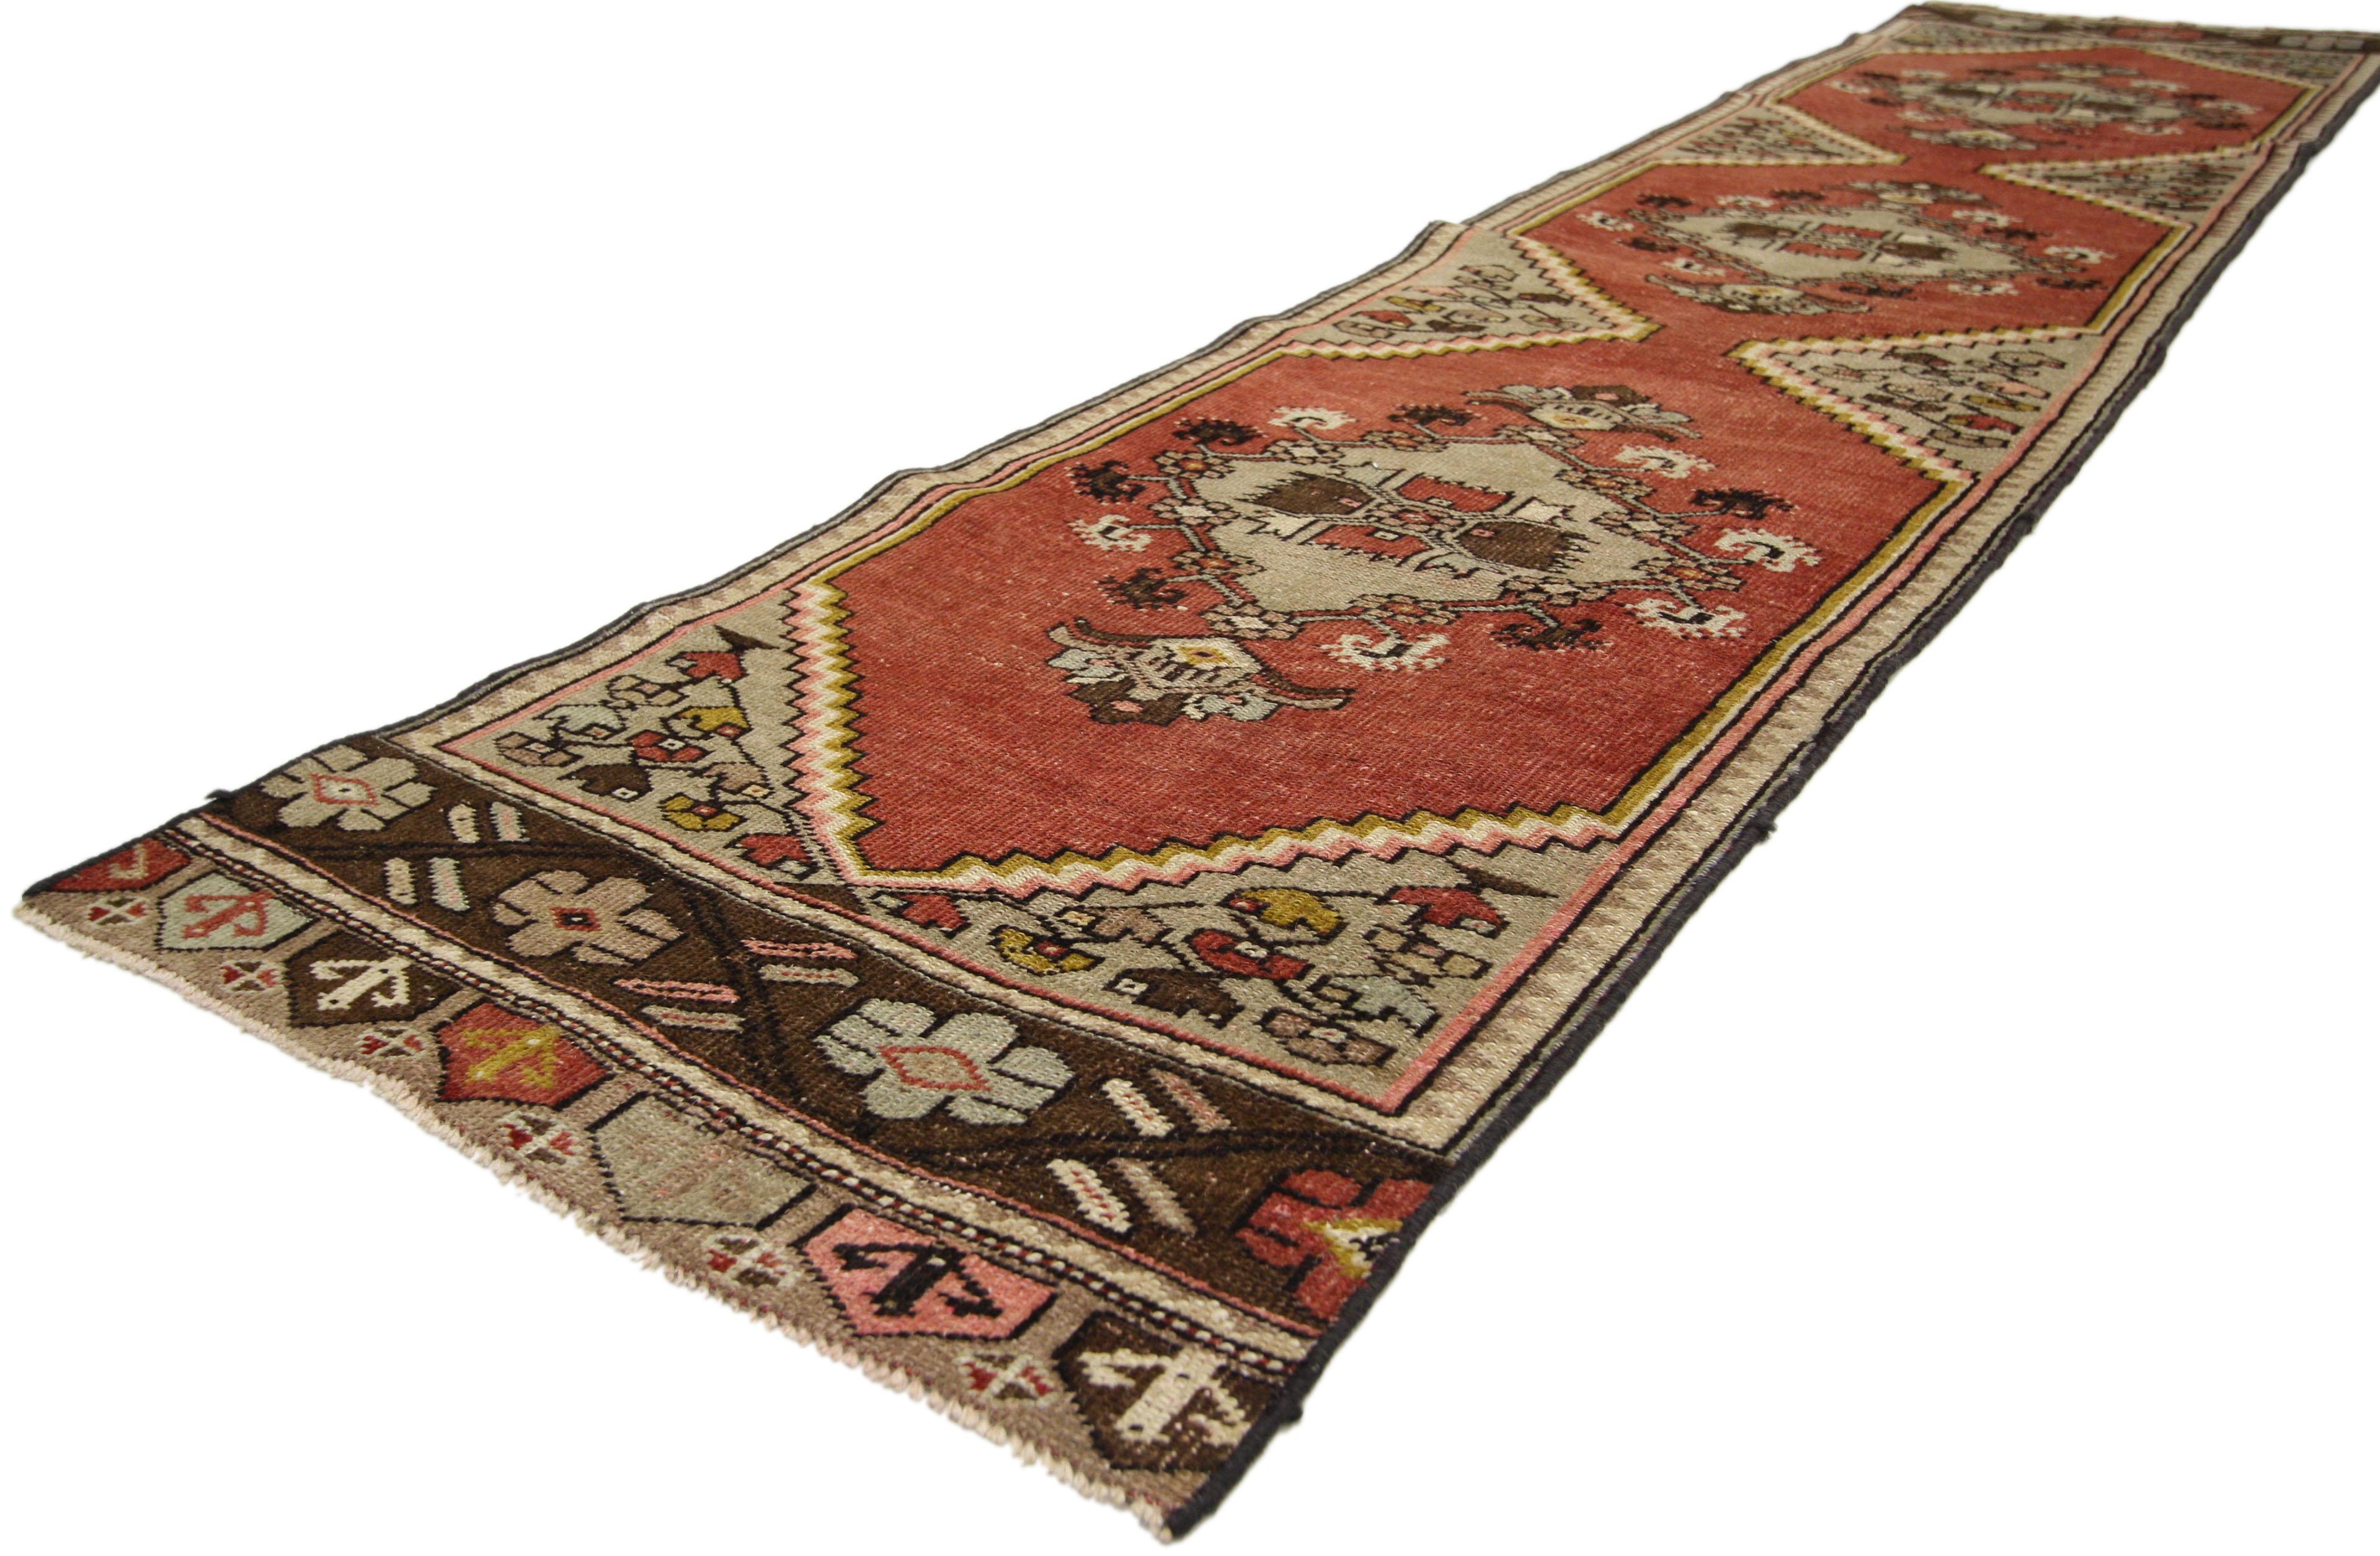 51147, vintage Turkish Oushak runner with English Country style, hallway runner. This hand knotted wool vintage Turkish Oushak runner features three floral lozenge-shaped medallions with palmette pendants spread across an abrashed brick red field.